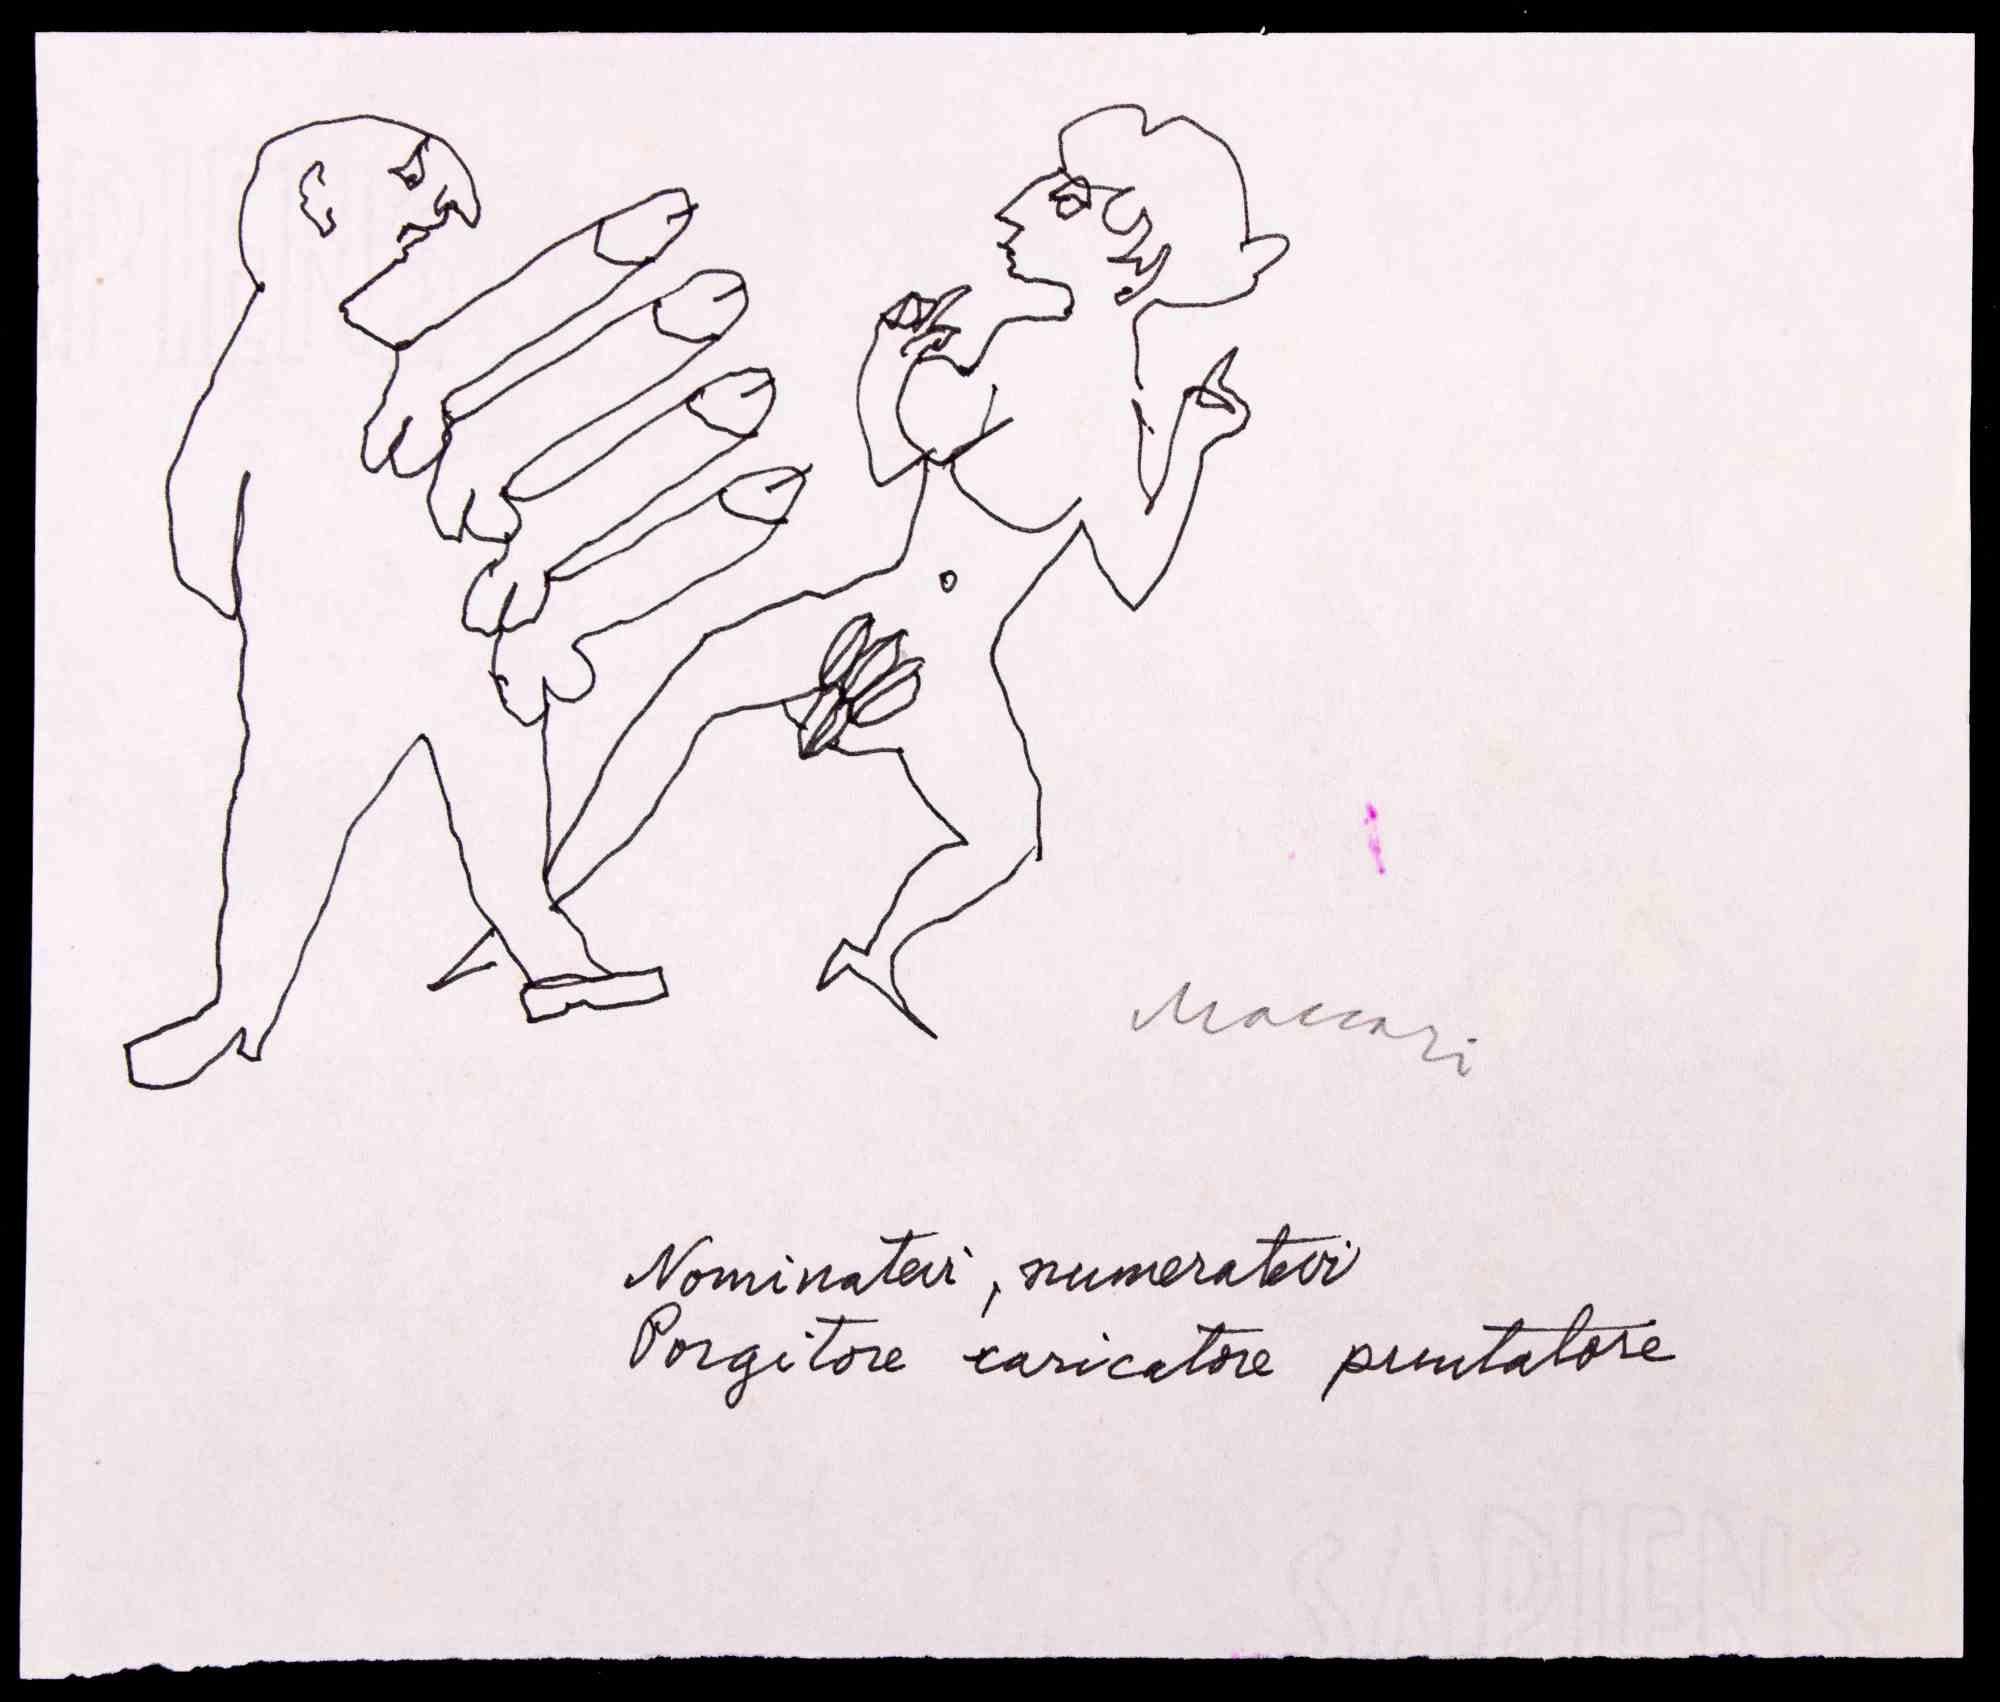 Possibility is a china ink Drawing realized by Mino Maccari in 1970.

Hand-signed on the lower margin.

Good condition on a white paper.

Mino Maccari (Siena, 1924-Rome, June 16, 1989) was an Italian writer, painter, engraver and journalist, winner